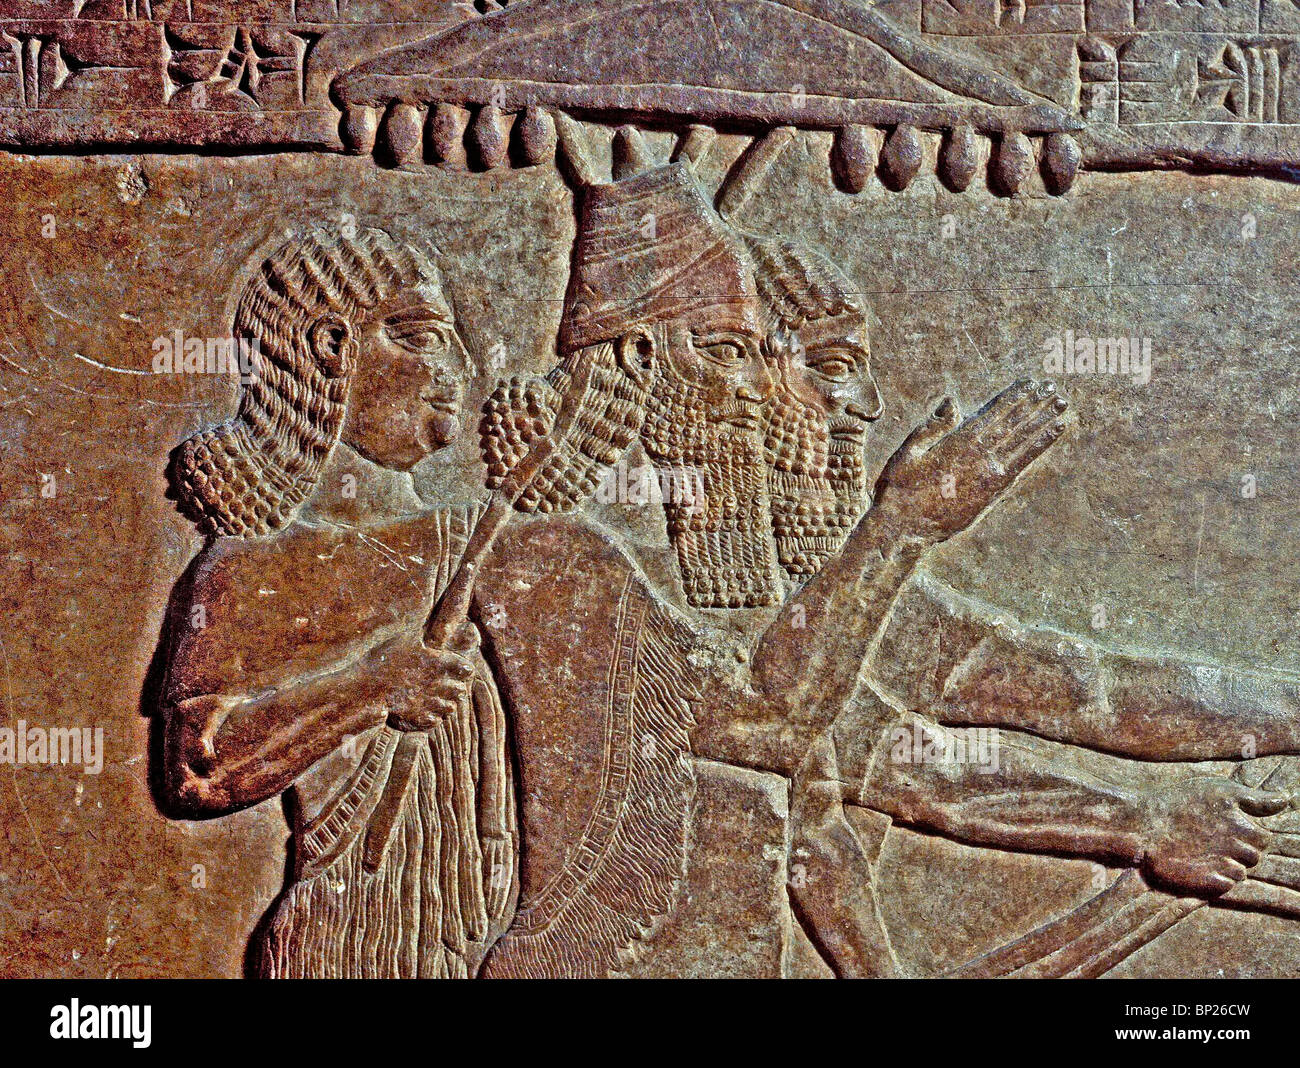 1011. KING TIGLATH PILESER IN TRIUMPH, RELIEF FROM THE ROYAL PALACE IN NIMRUD, 730 B.C. Stock Photo